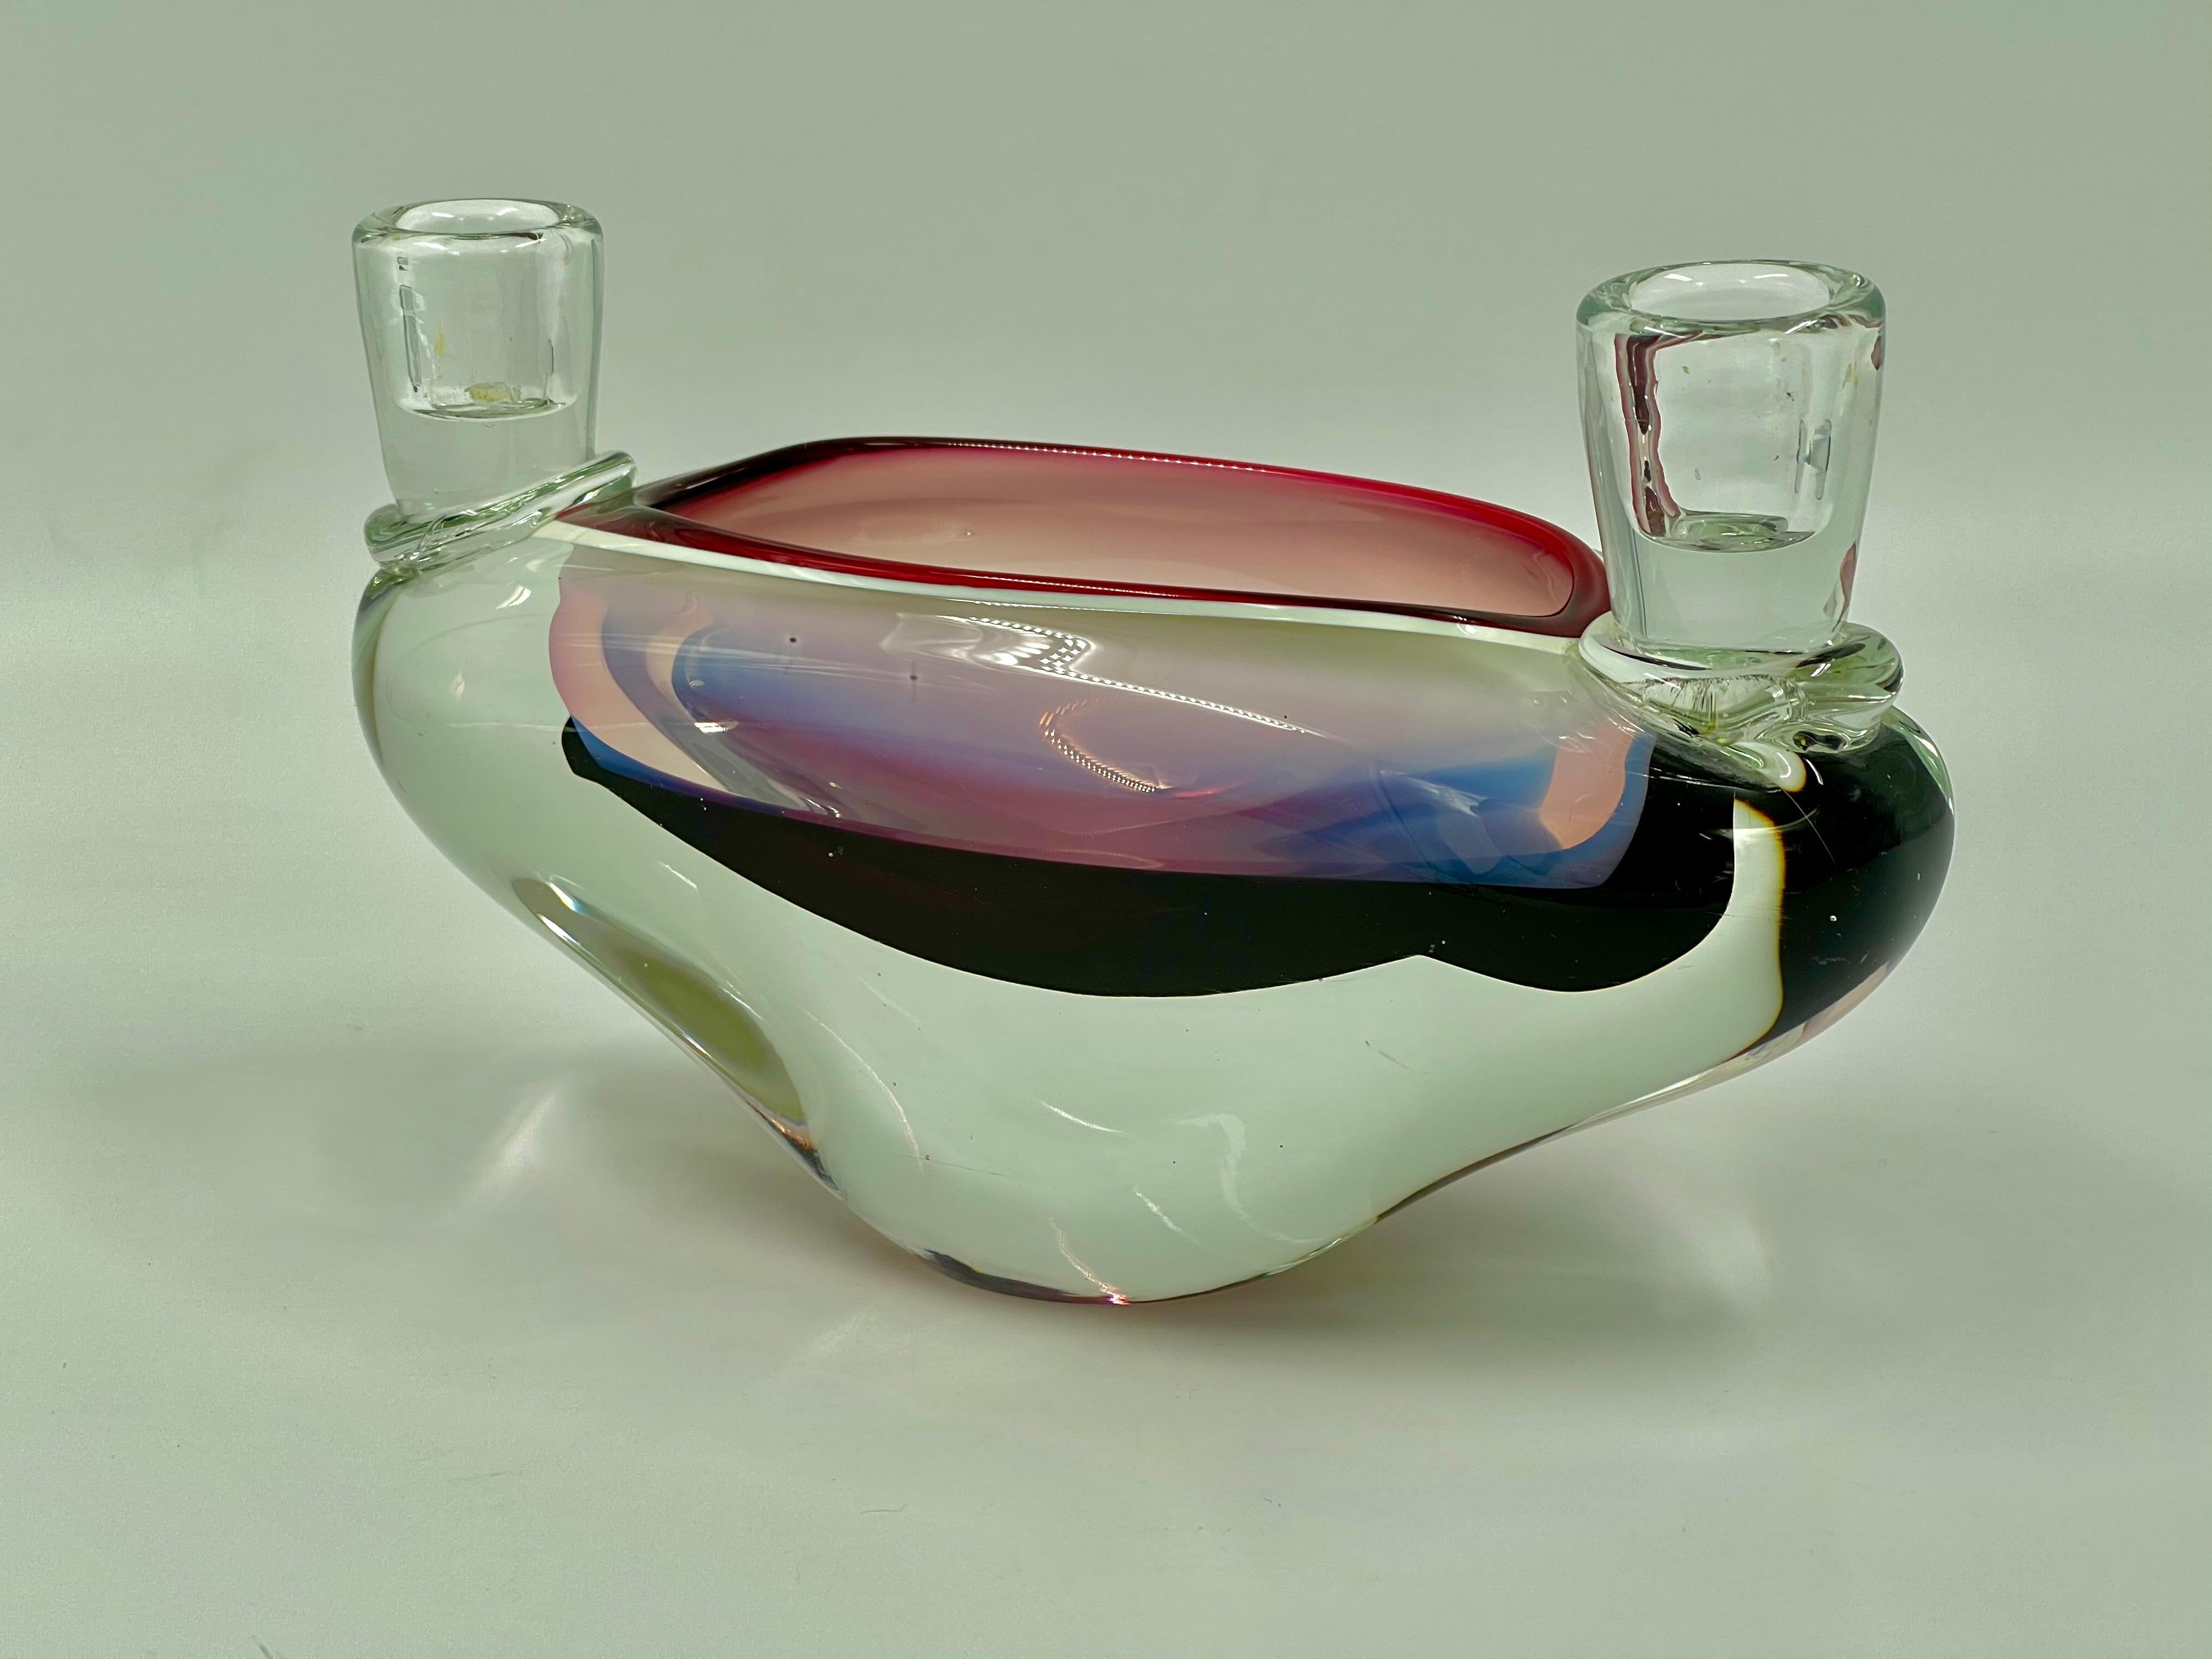 This is a vintage Czech Art Glass Candle holder designed by Josef Michael Hospodka (1/21/1923 - 8/11/1989) for the Chribska glass firm around 1950. The design of the candle holder is called 